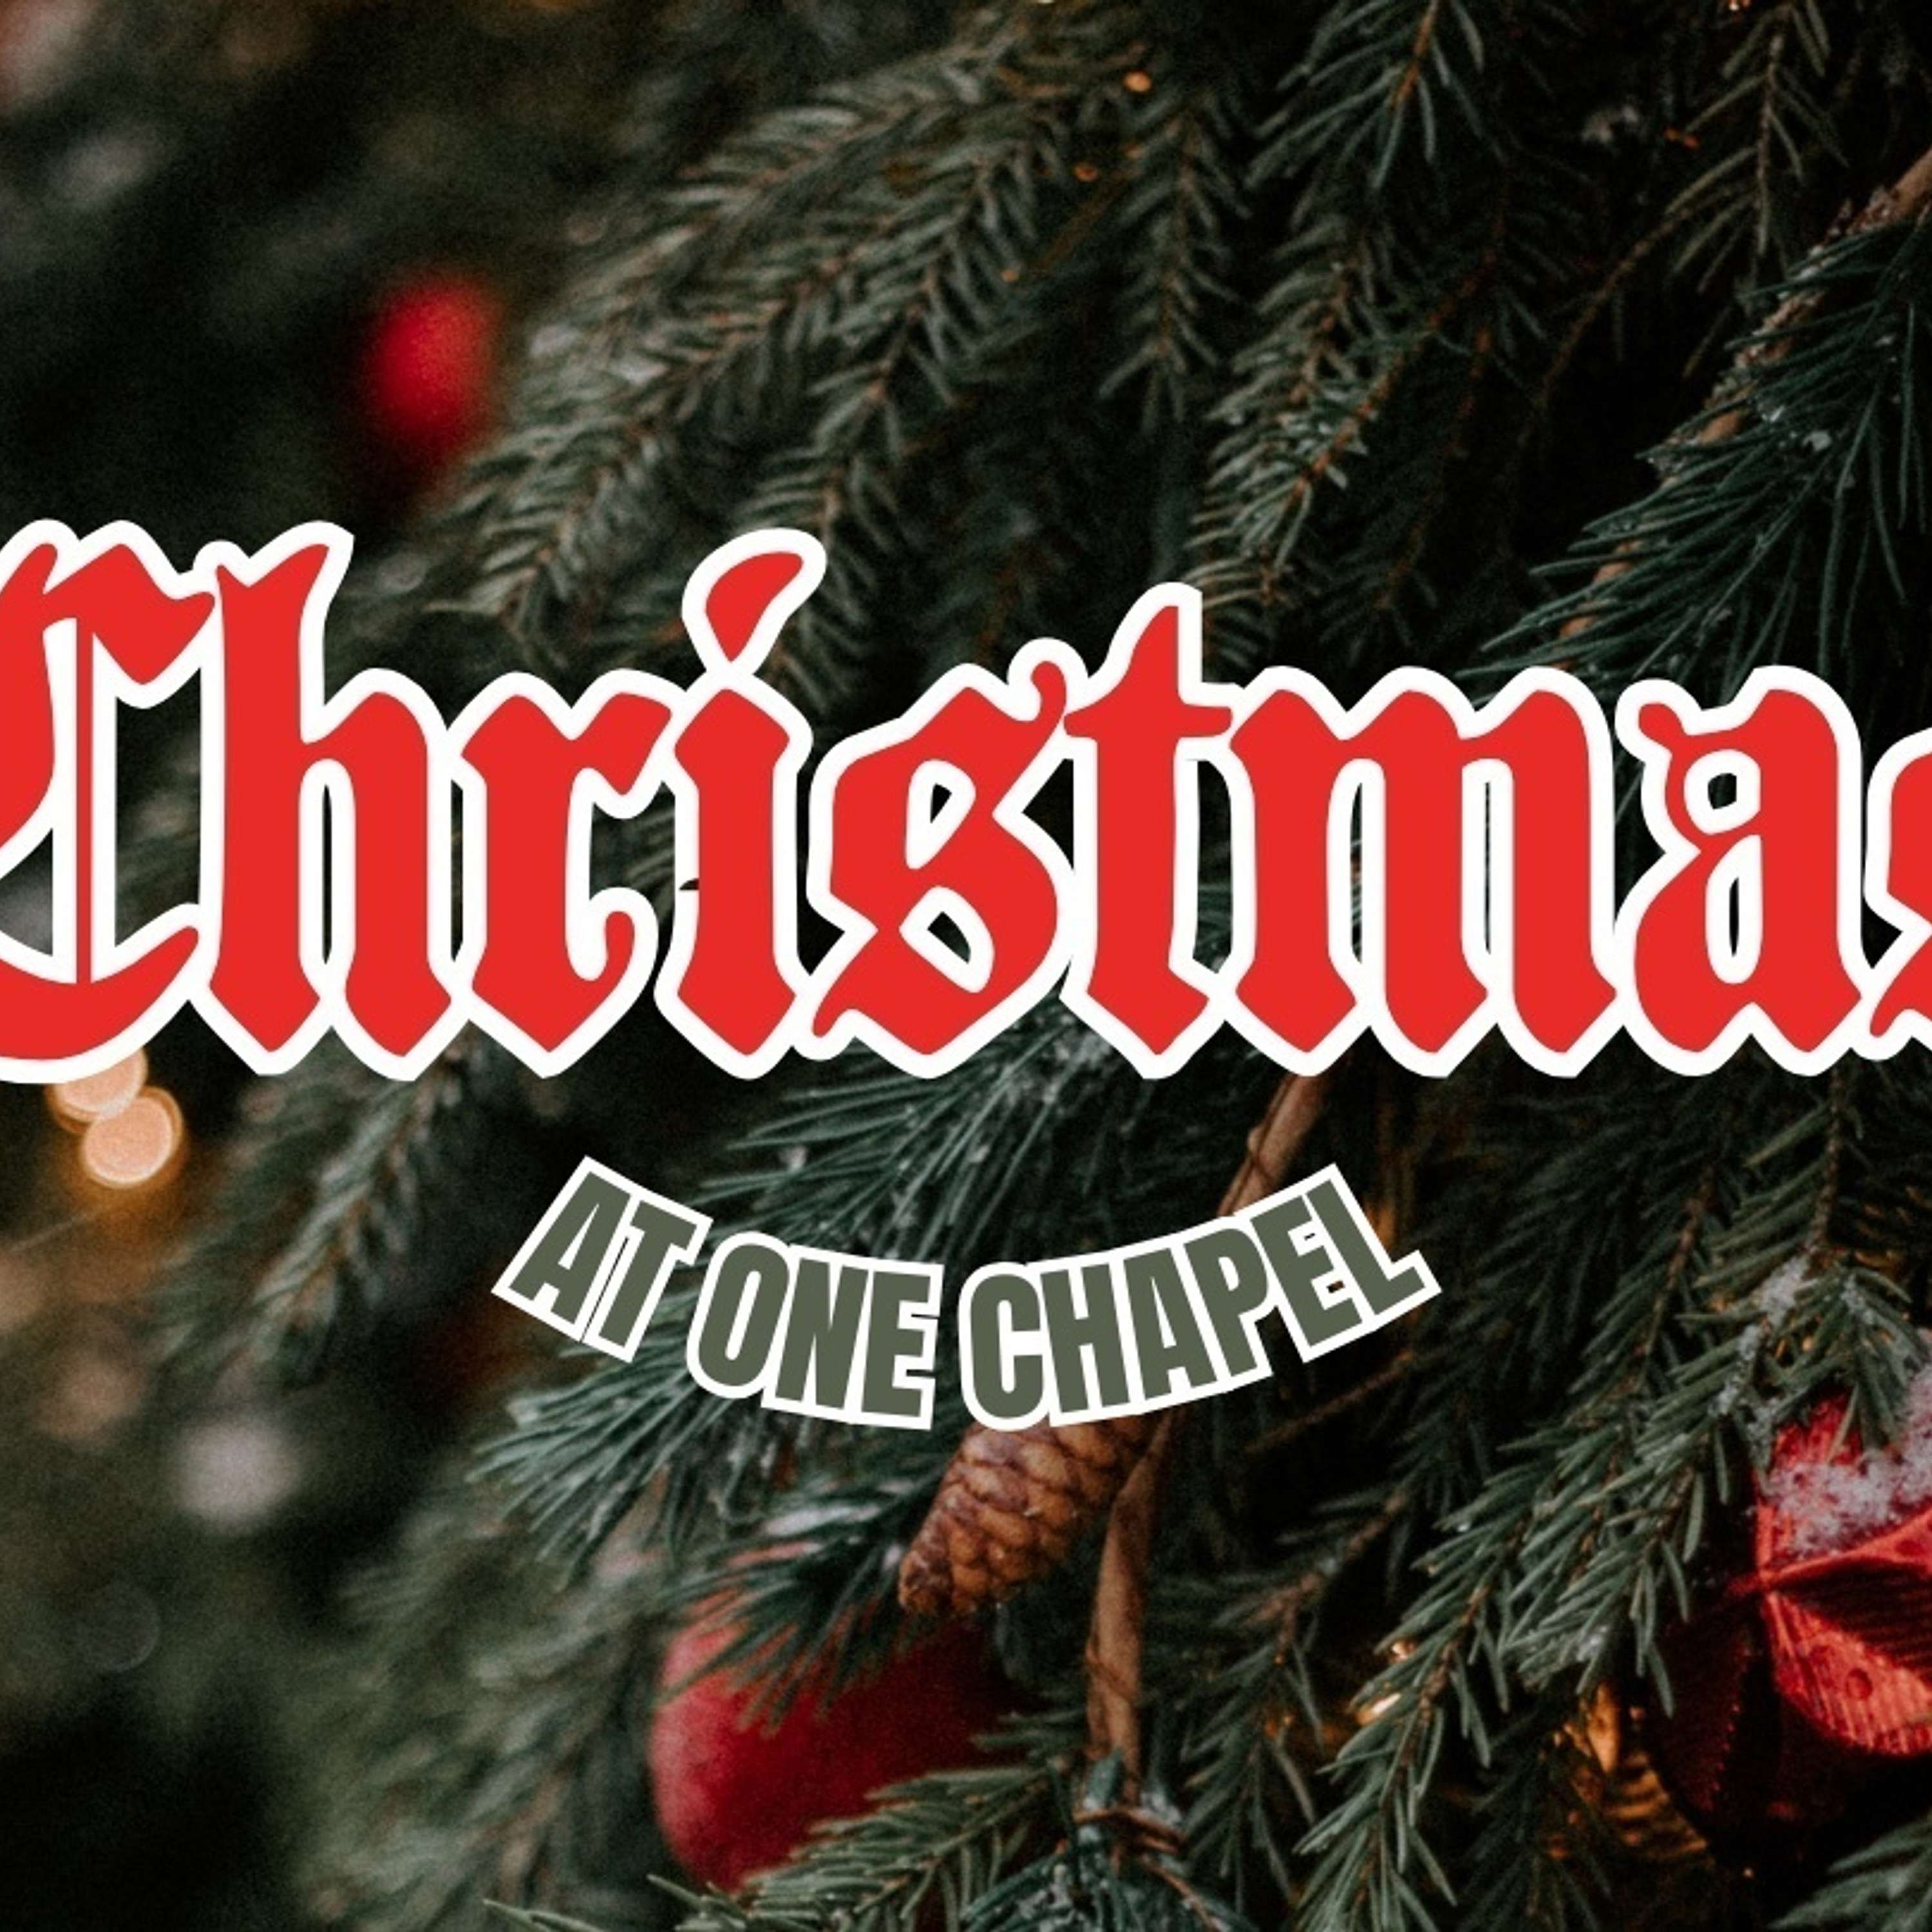 Christmas at One Chapel: The Word Became Flesh